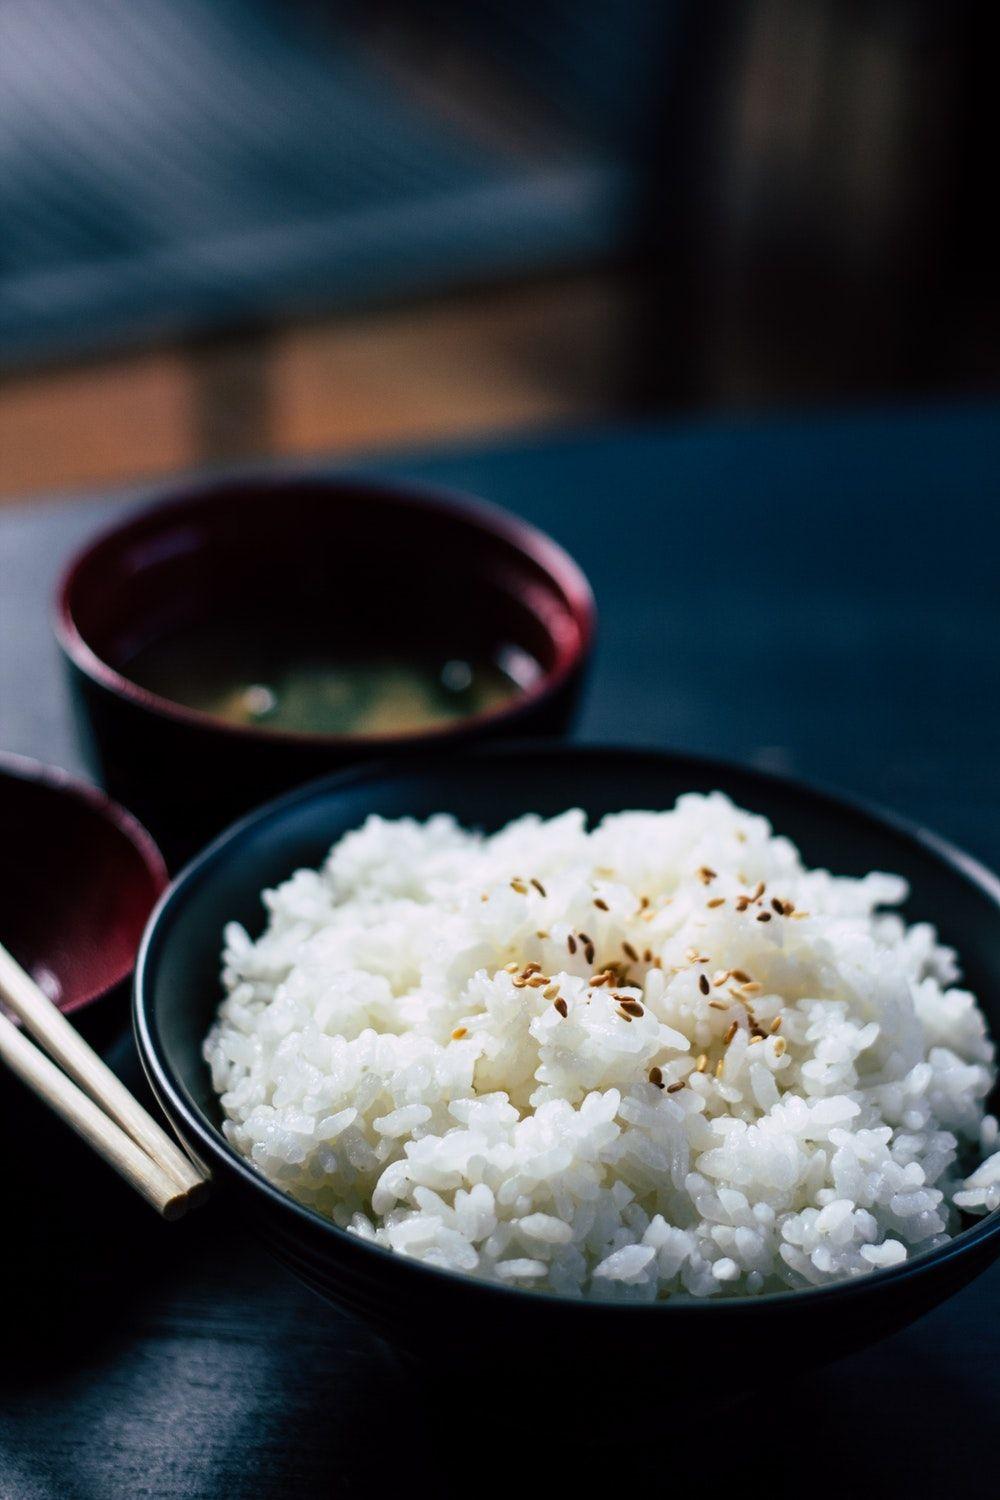 Rice Picture. Download Free Image